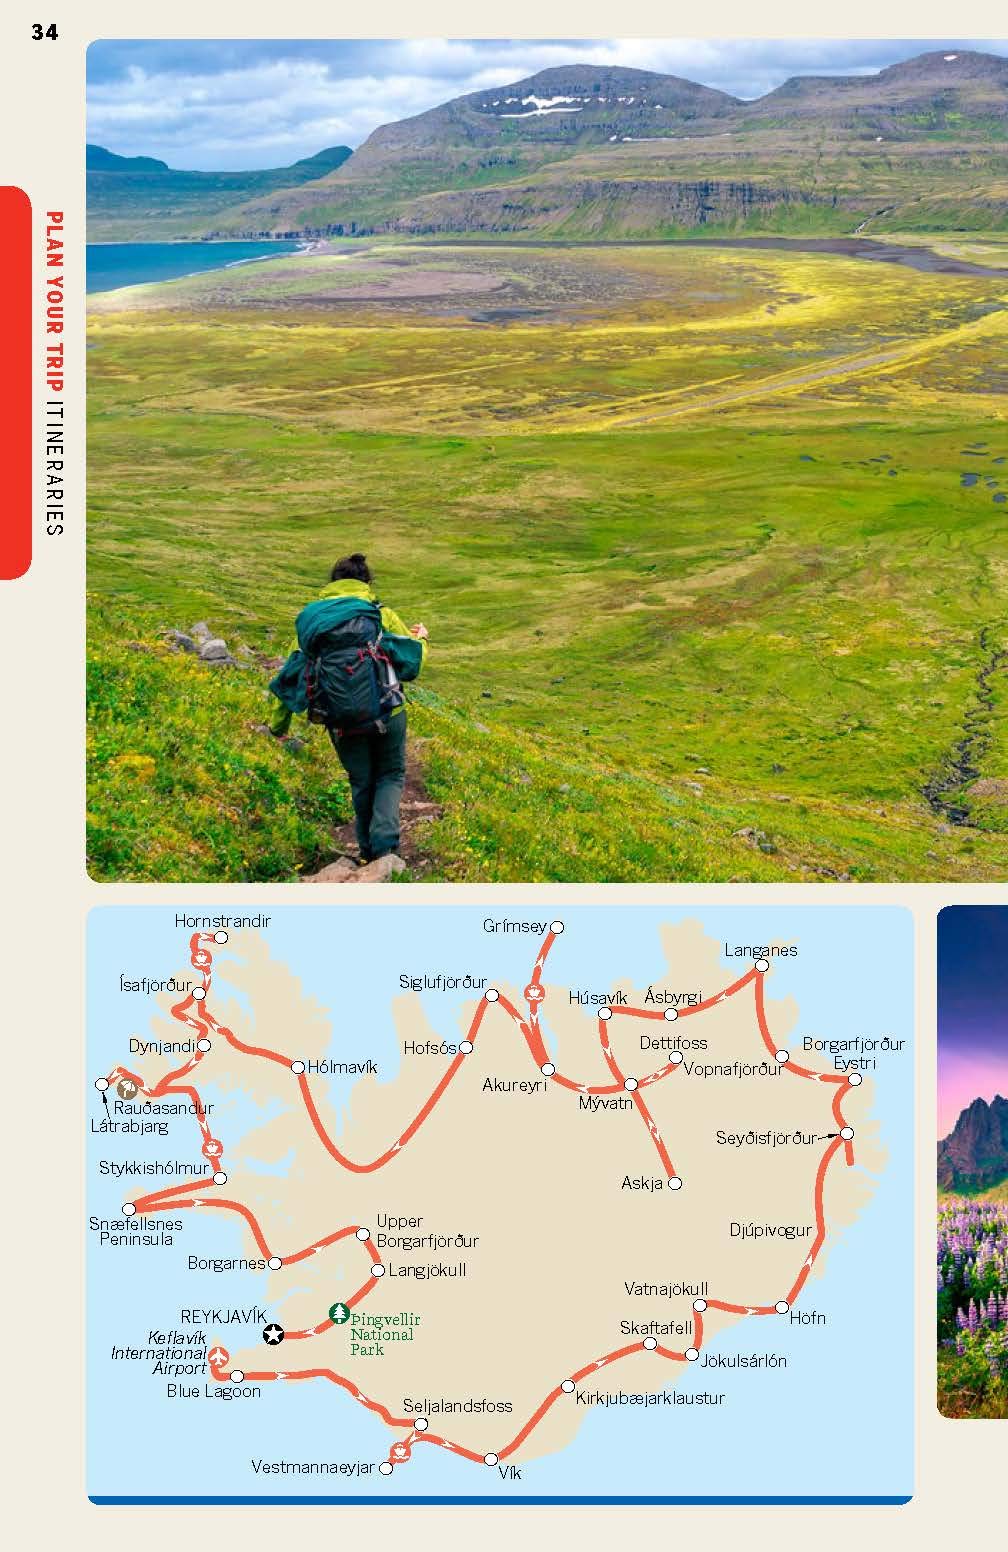 Iceland 9 (Lonely Planet)